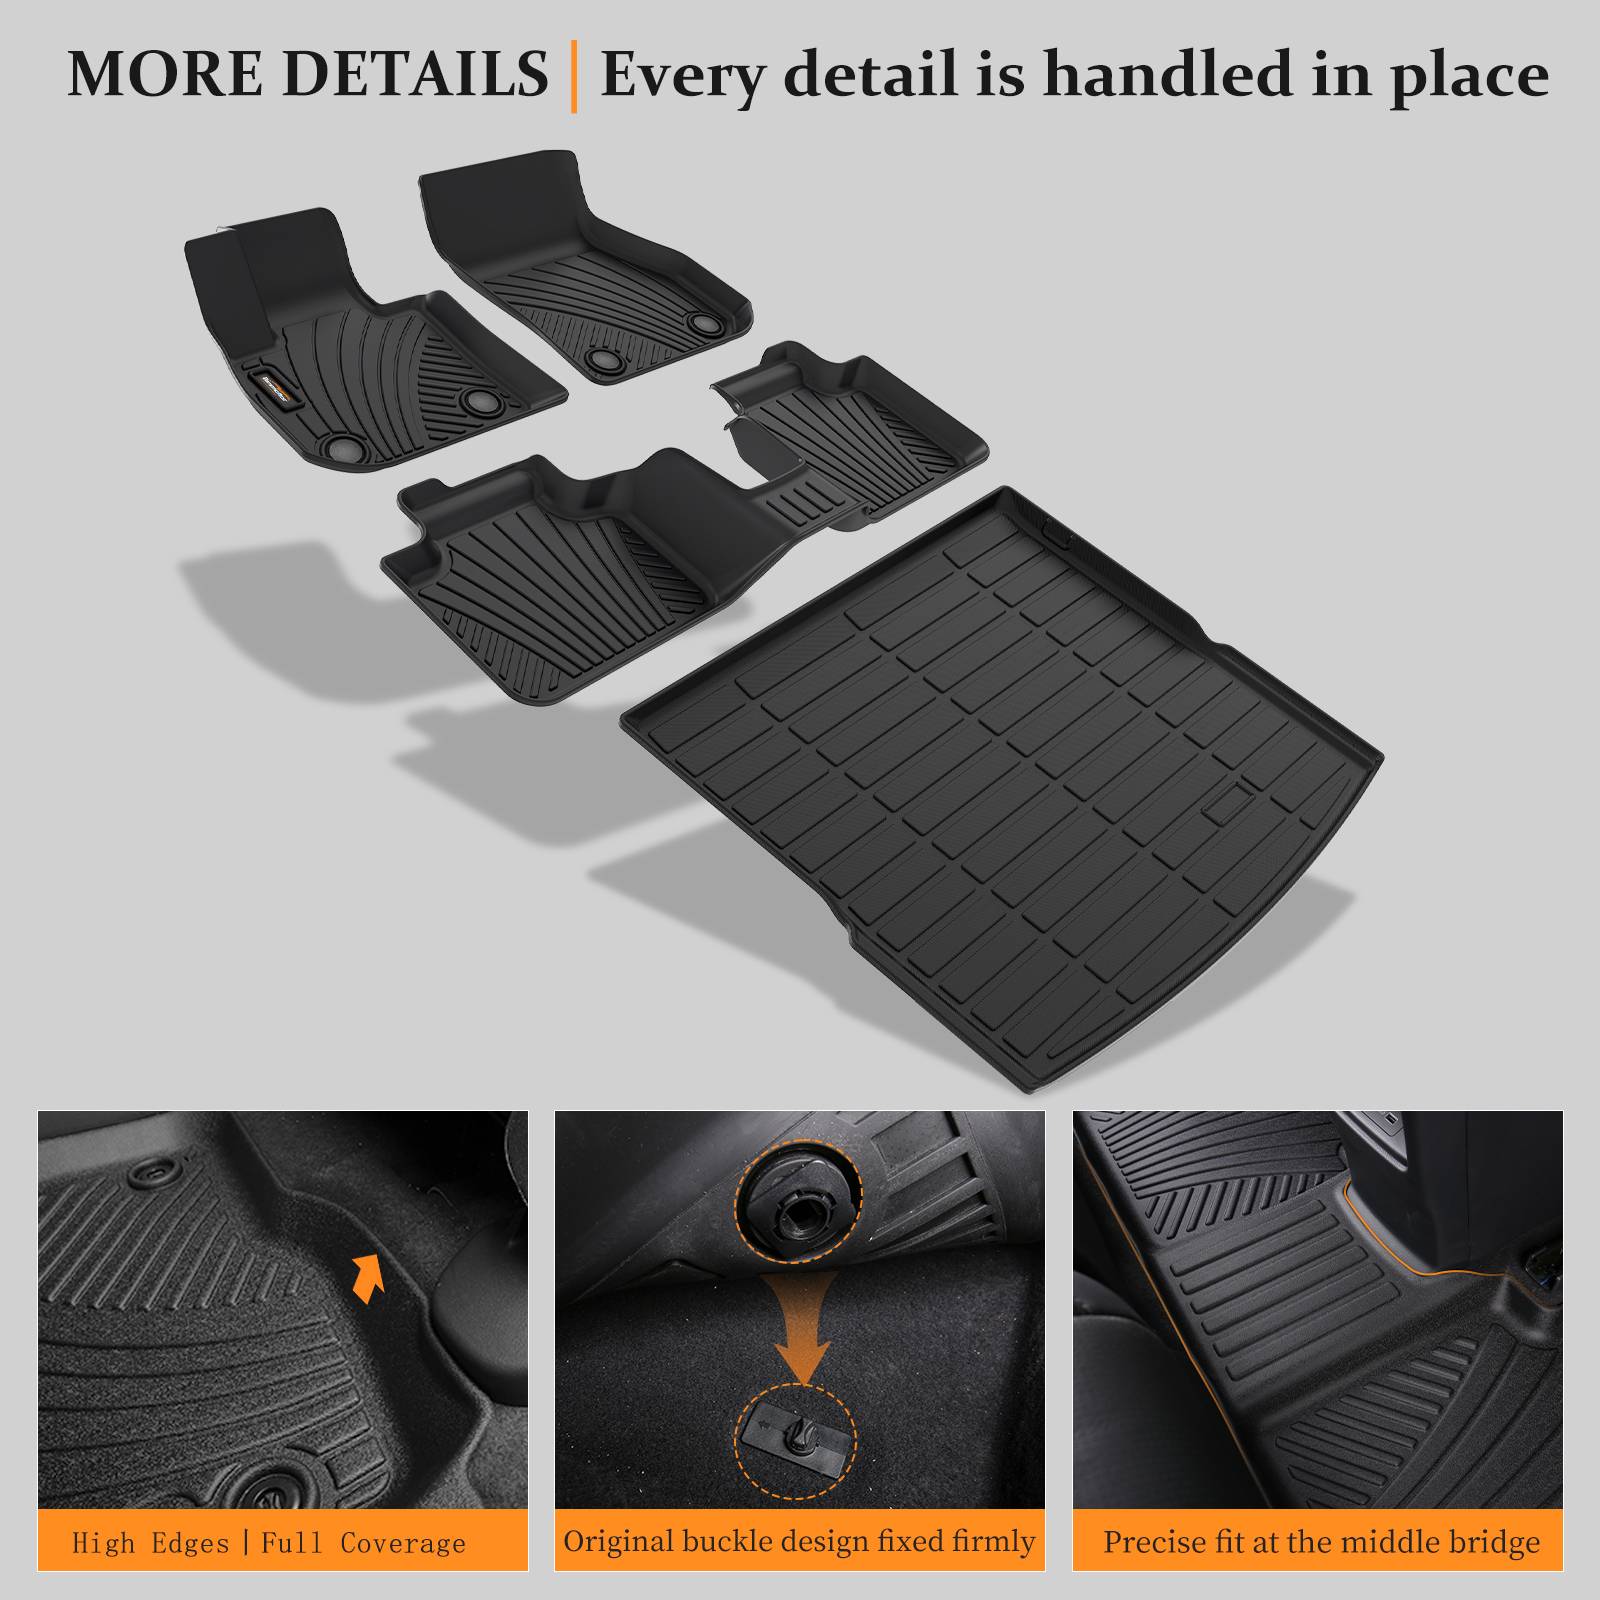 Binmotor-Floor Mats for Mazda CX-9 6 Passenger(The 2nd Row Bucket Seats Without Center Console), All Weather Car Floor Liners（compatible year 2020-2023）